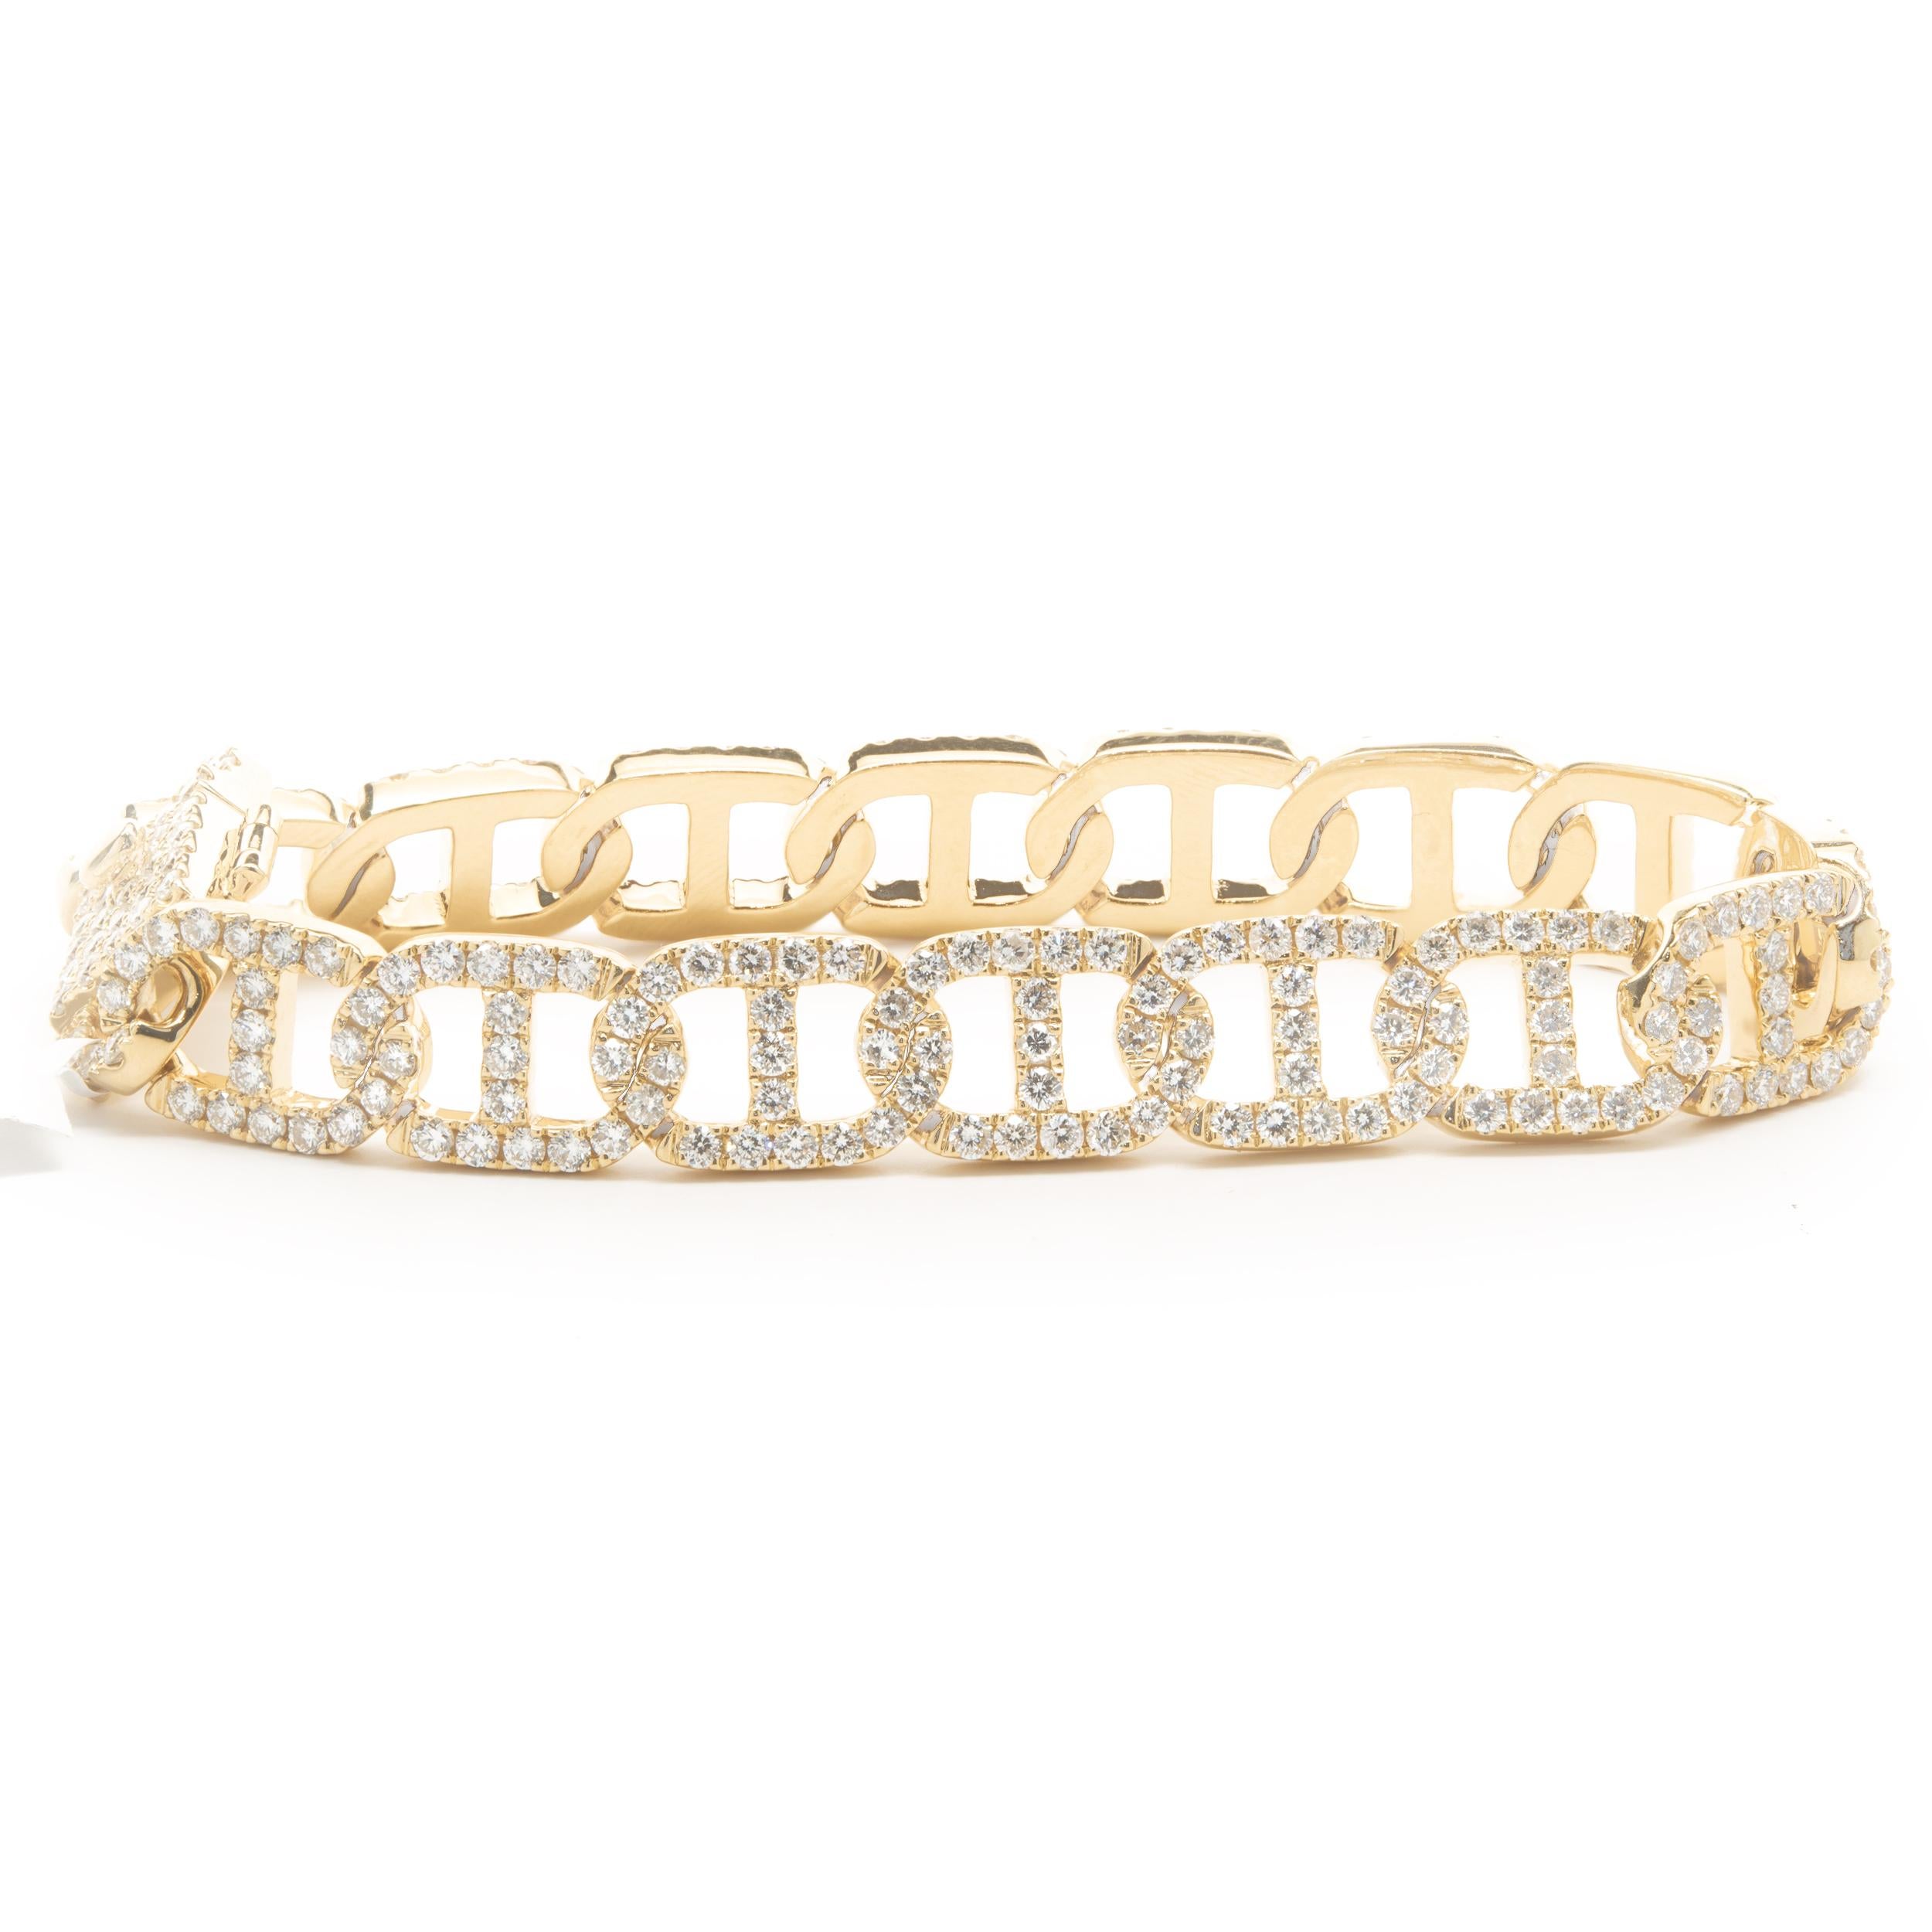 Designer: custom
Material: 18K yellow gold
Diamond: 289 round brilliant= 7.21cttw
Color: G 
Clarity: VS1
Dimensions: bracelet measures 7.25-inches in length
Weight: 36.49 grams